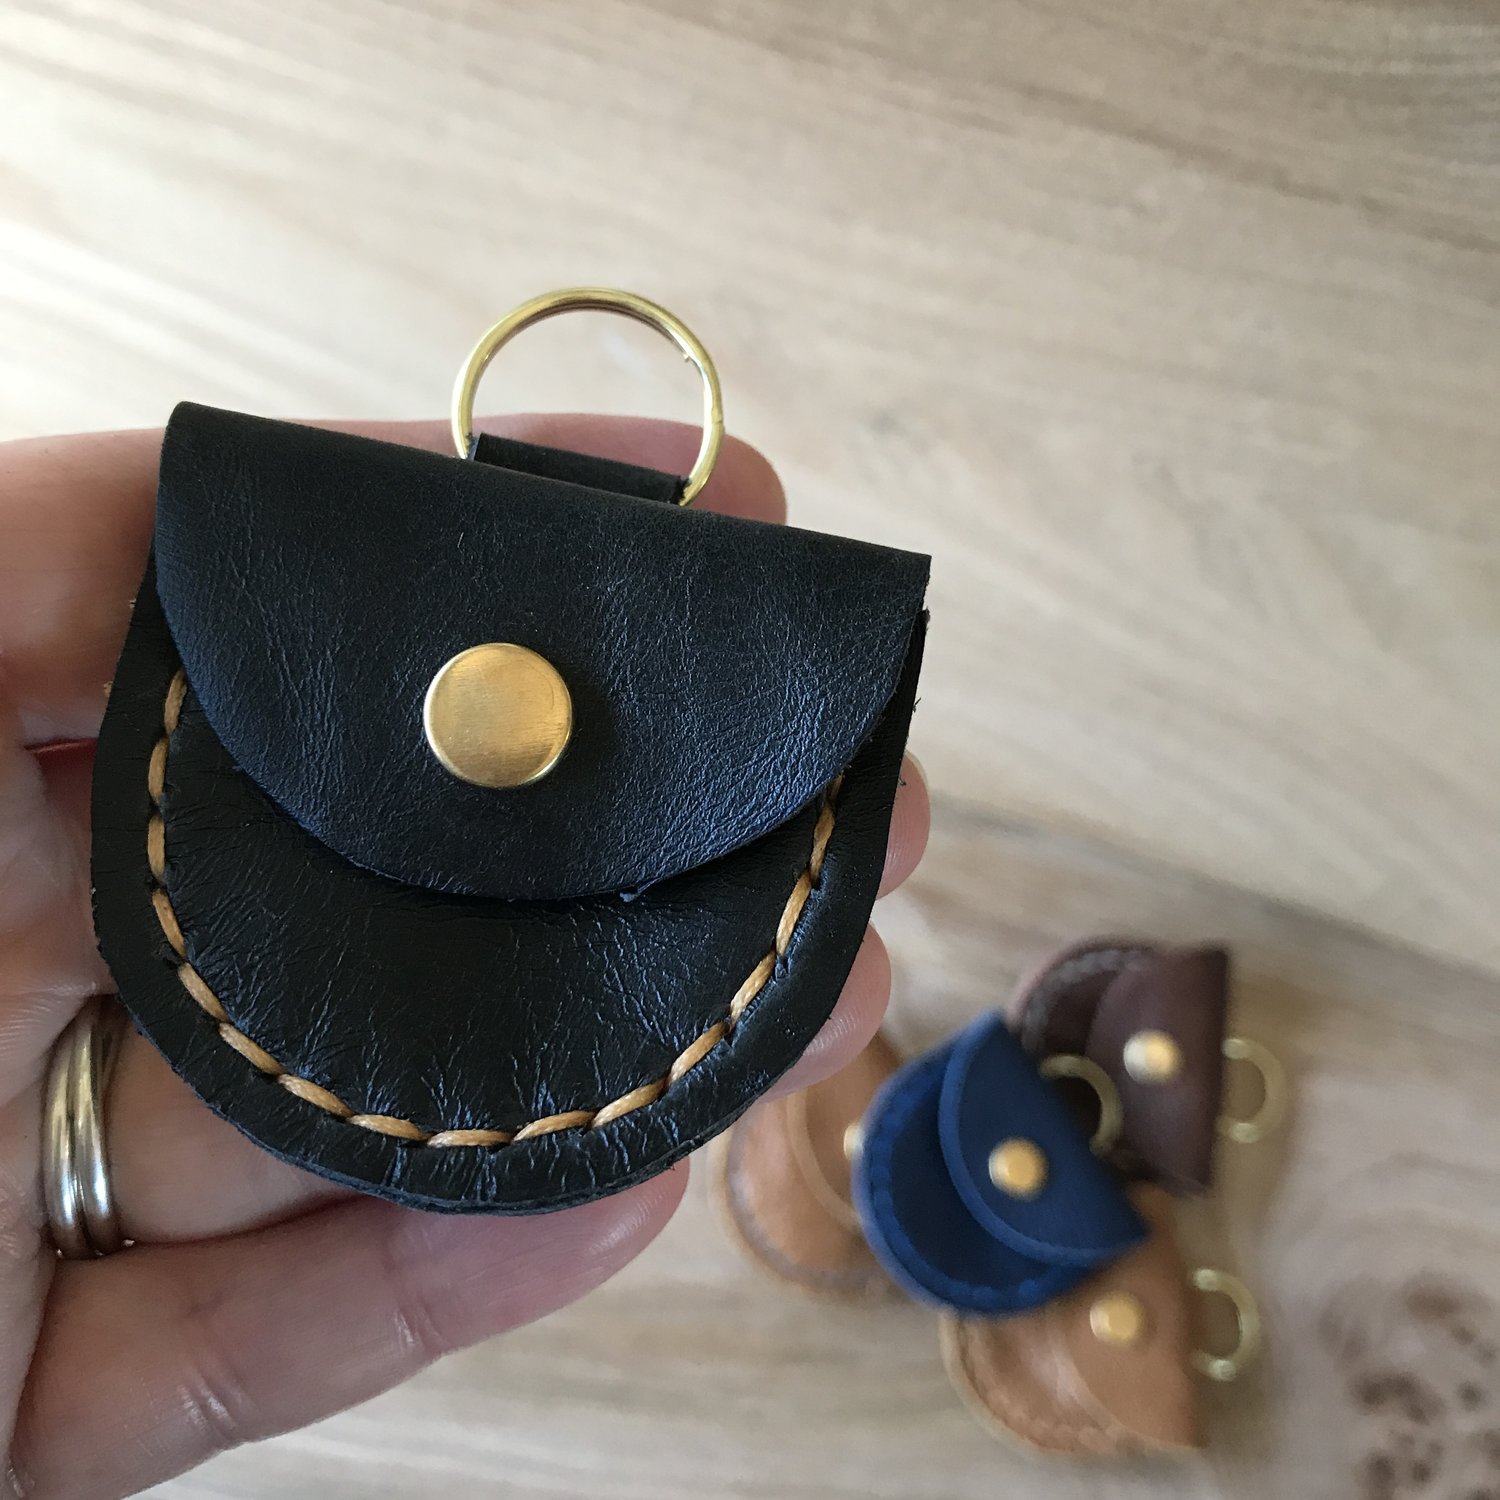 Mini LUNA - hand stitched leather keyring / ring keeper - Brown